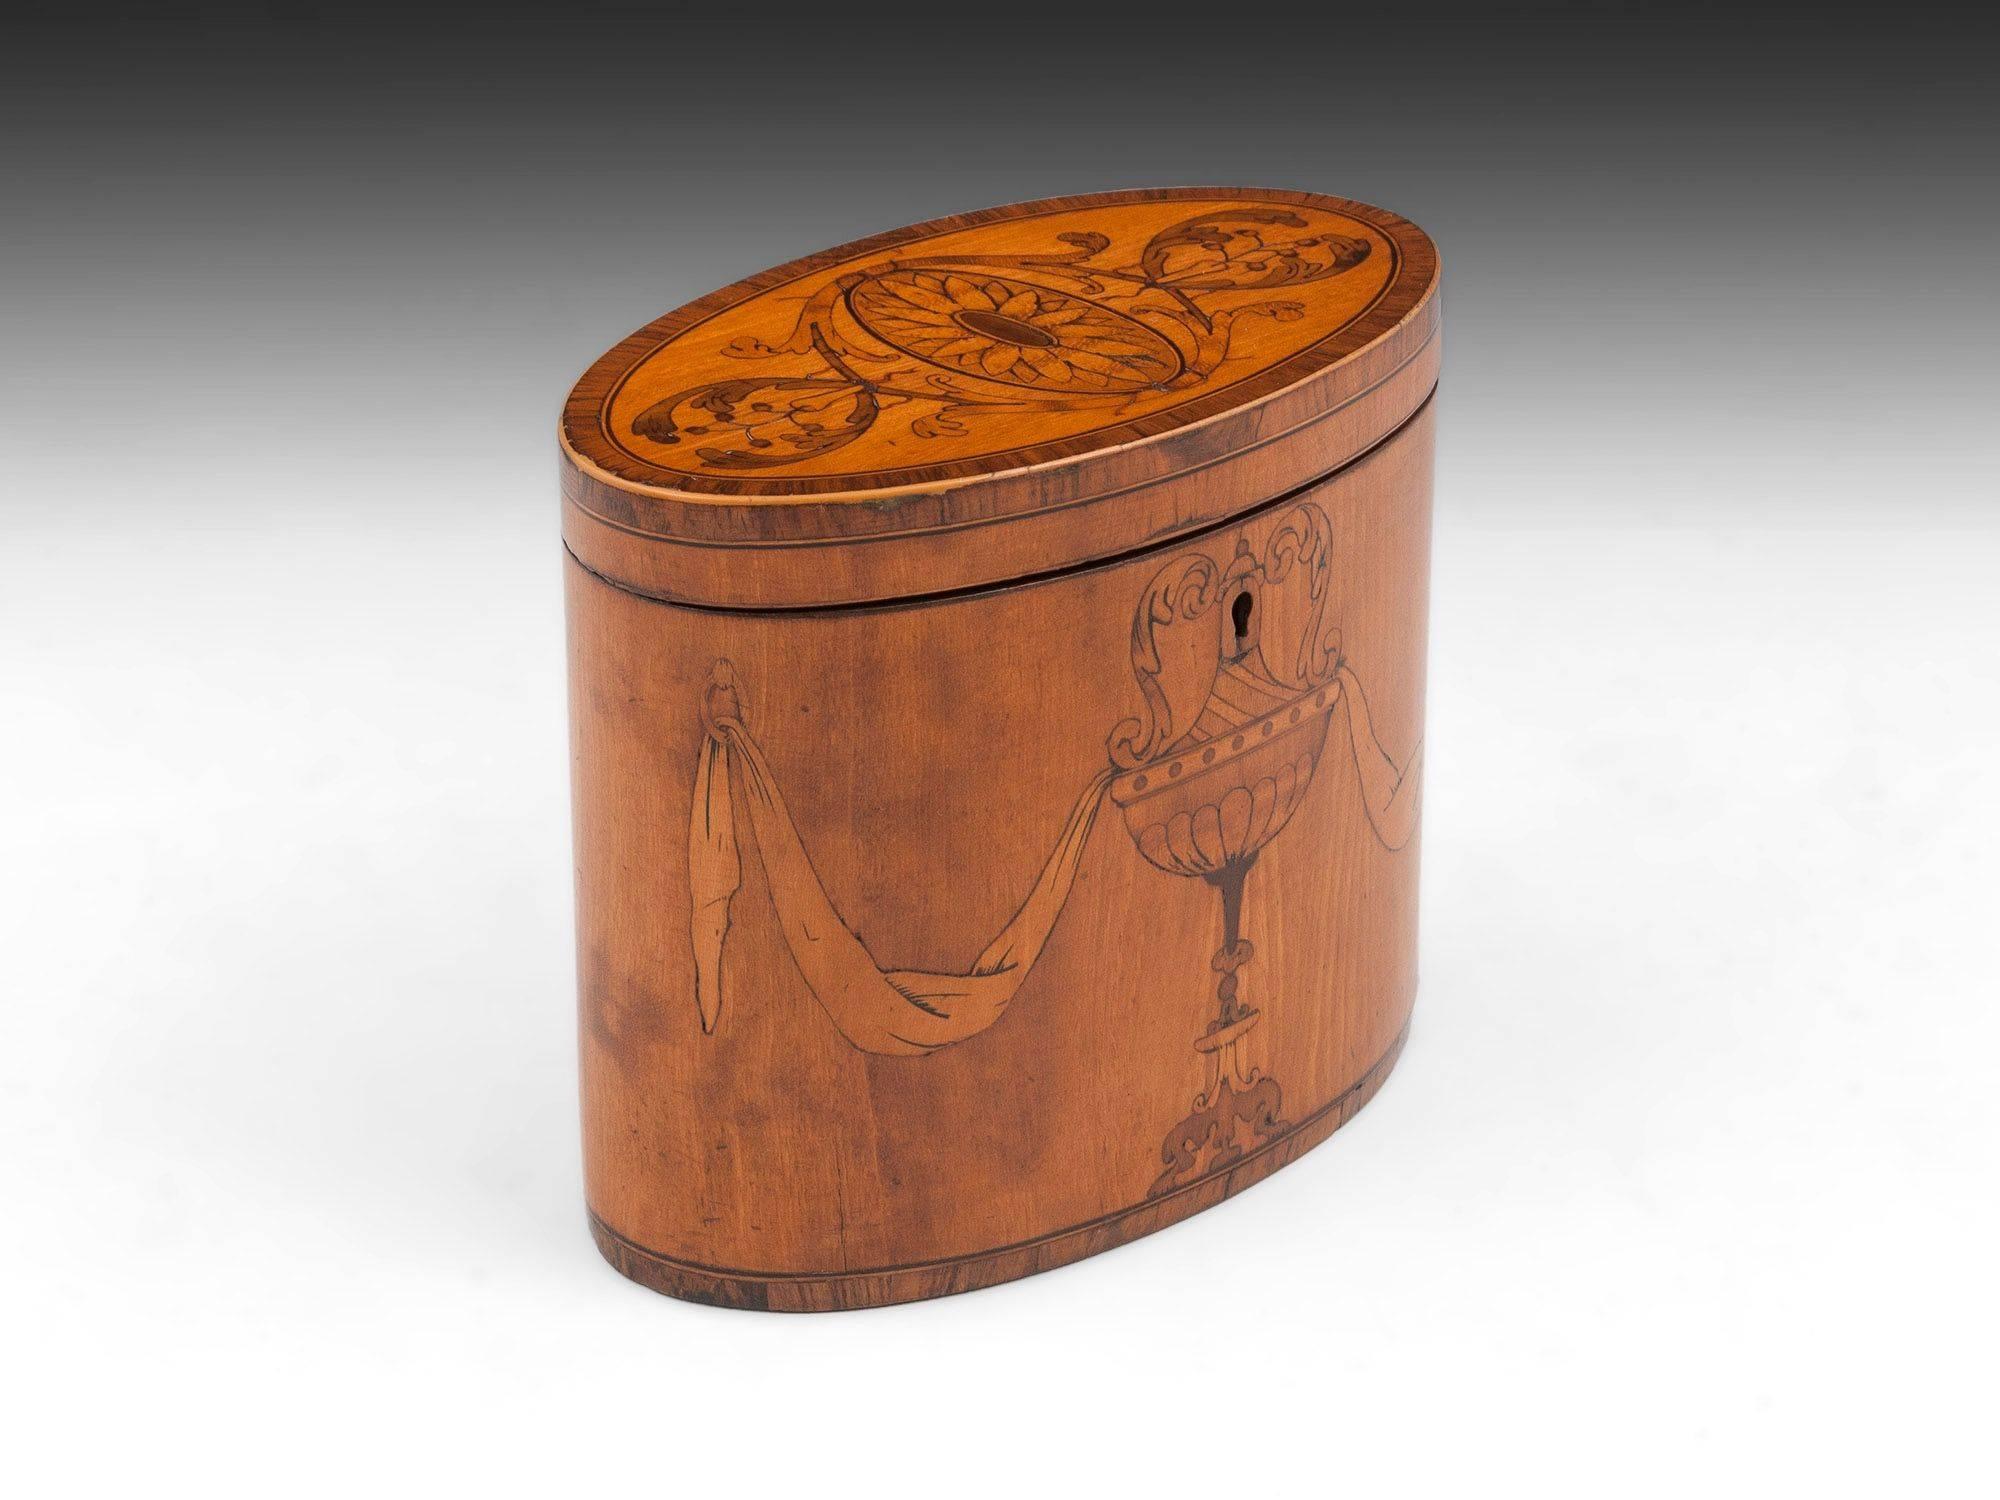 The tea caddy has kingwood crossbanding and boxwood edging and is inlaid with Adam style urn and husk swags. The top has symmetrical entwined leaves surrounding an inlaid oval paterae.